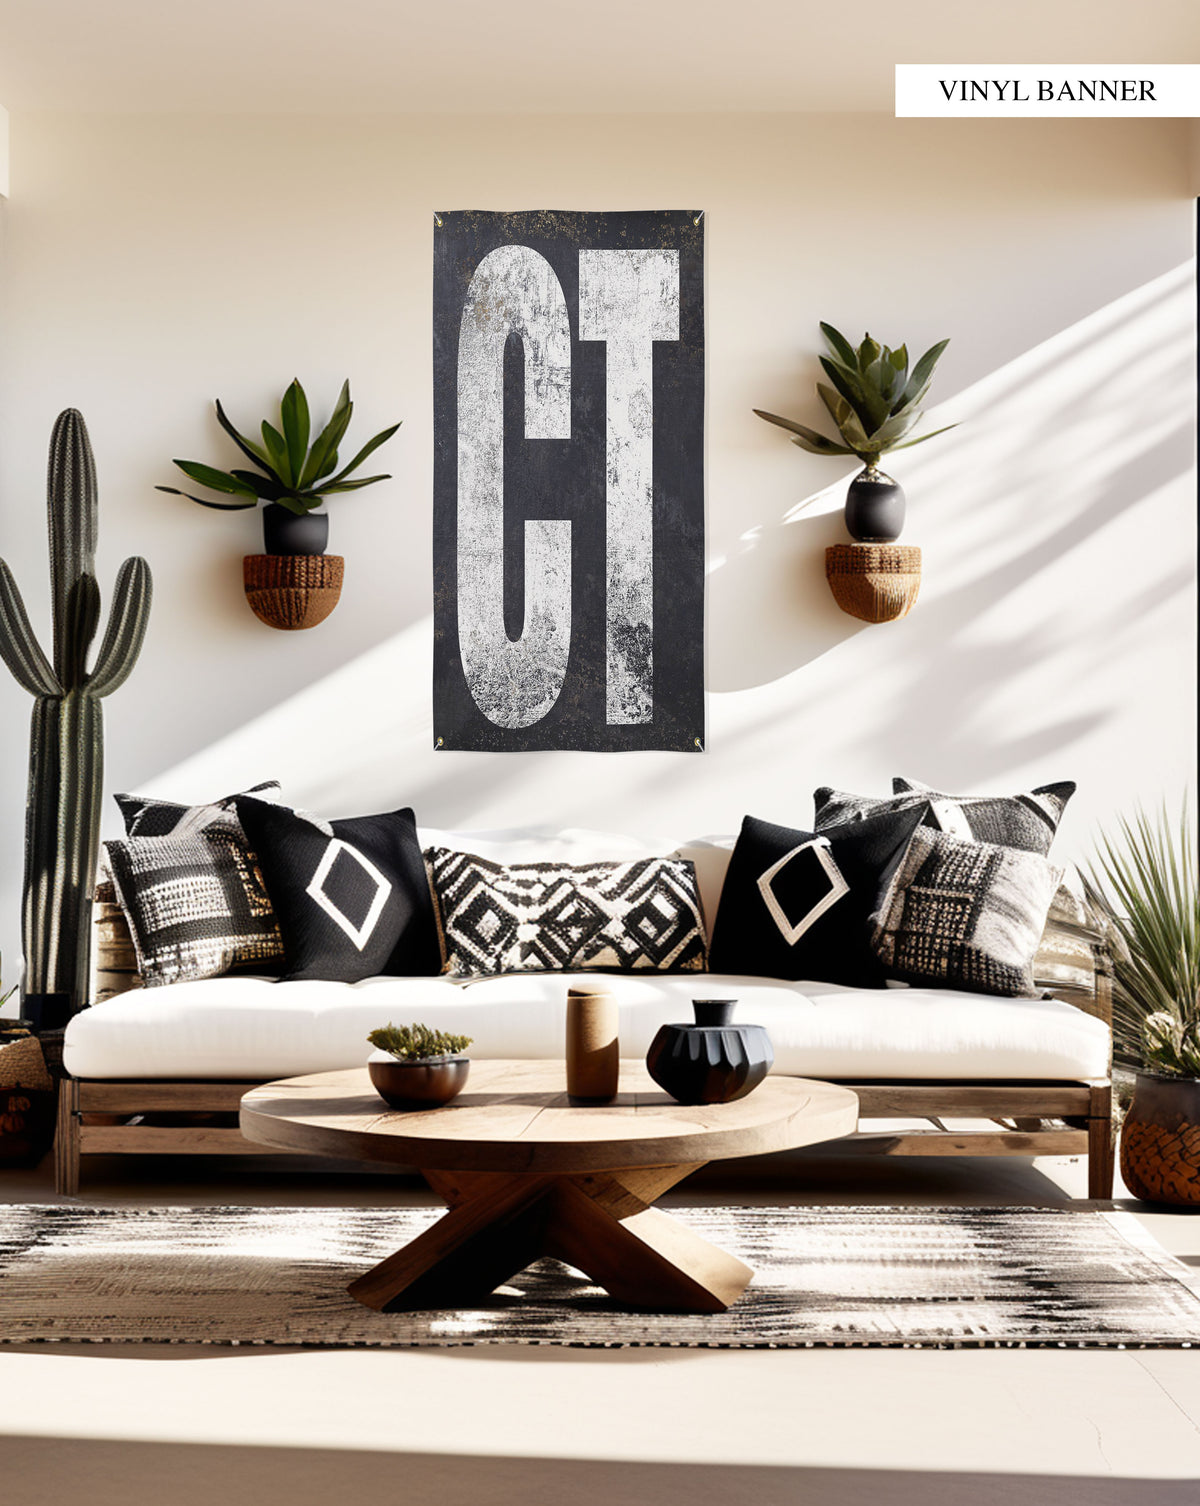 "Connecticut State Decor Vinyl Tapestry: A stunning outdoor patio accent featuring bold typography print, ideal for celebrating Connecticut pride in gardens or as a thoughtful moving state gift."